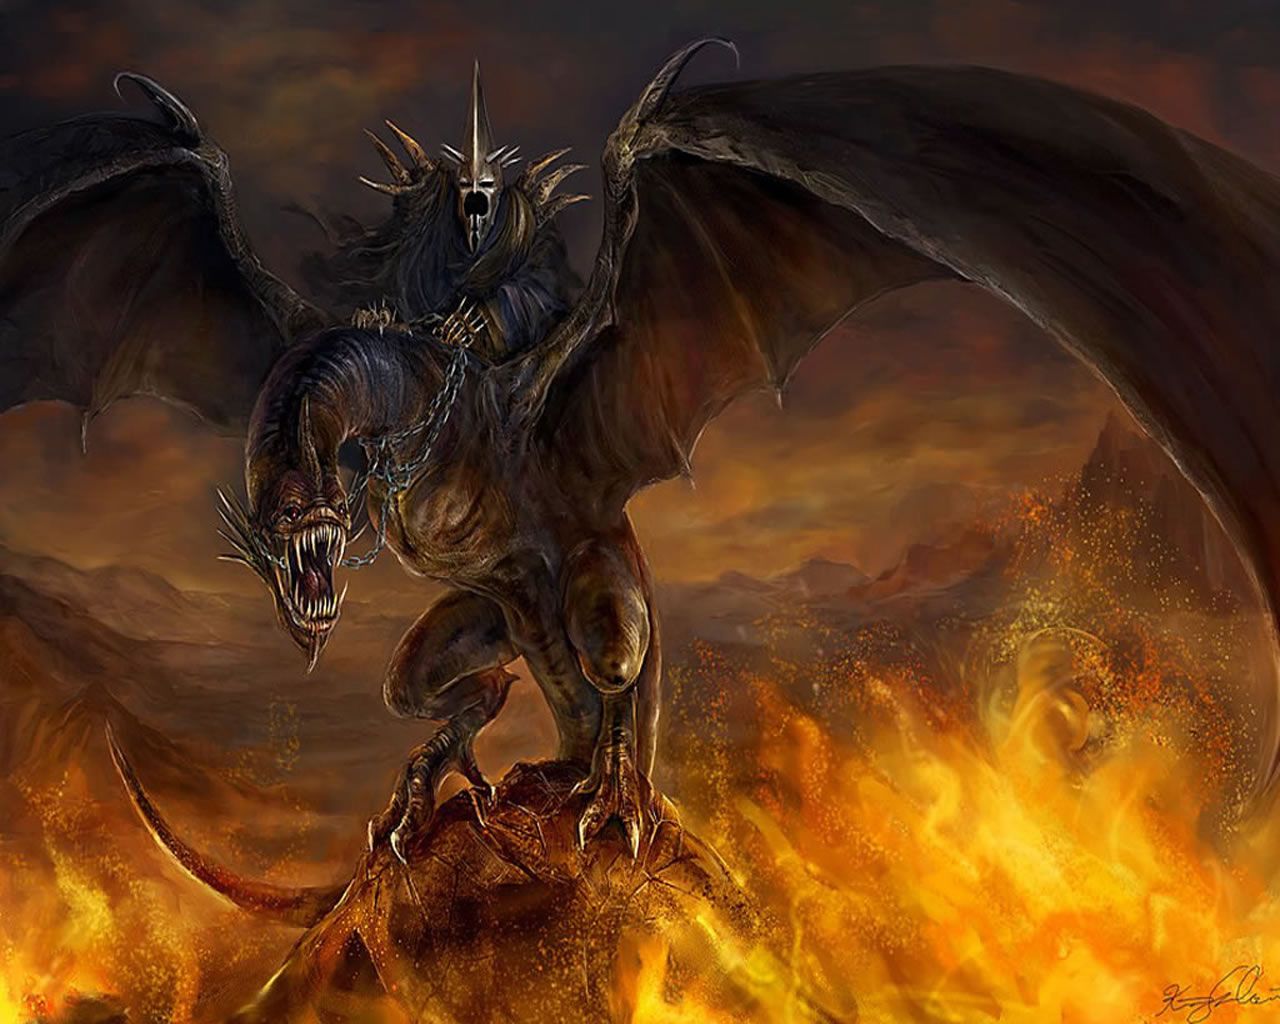 the lord of the rings wallpaper hd,dragon,cg artwork,demon,mythology,mythical creature